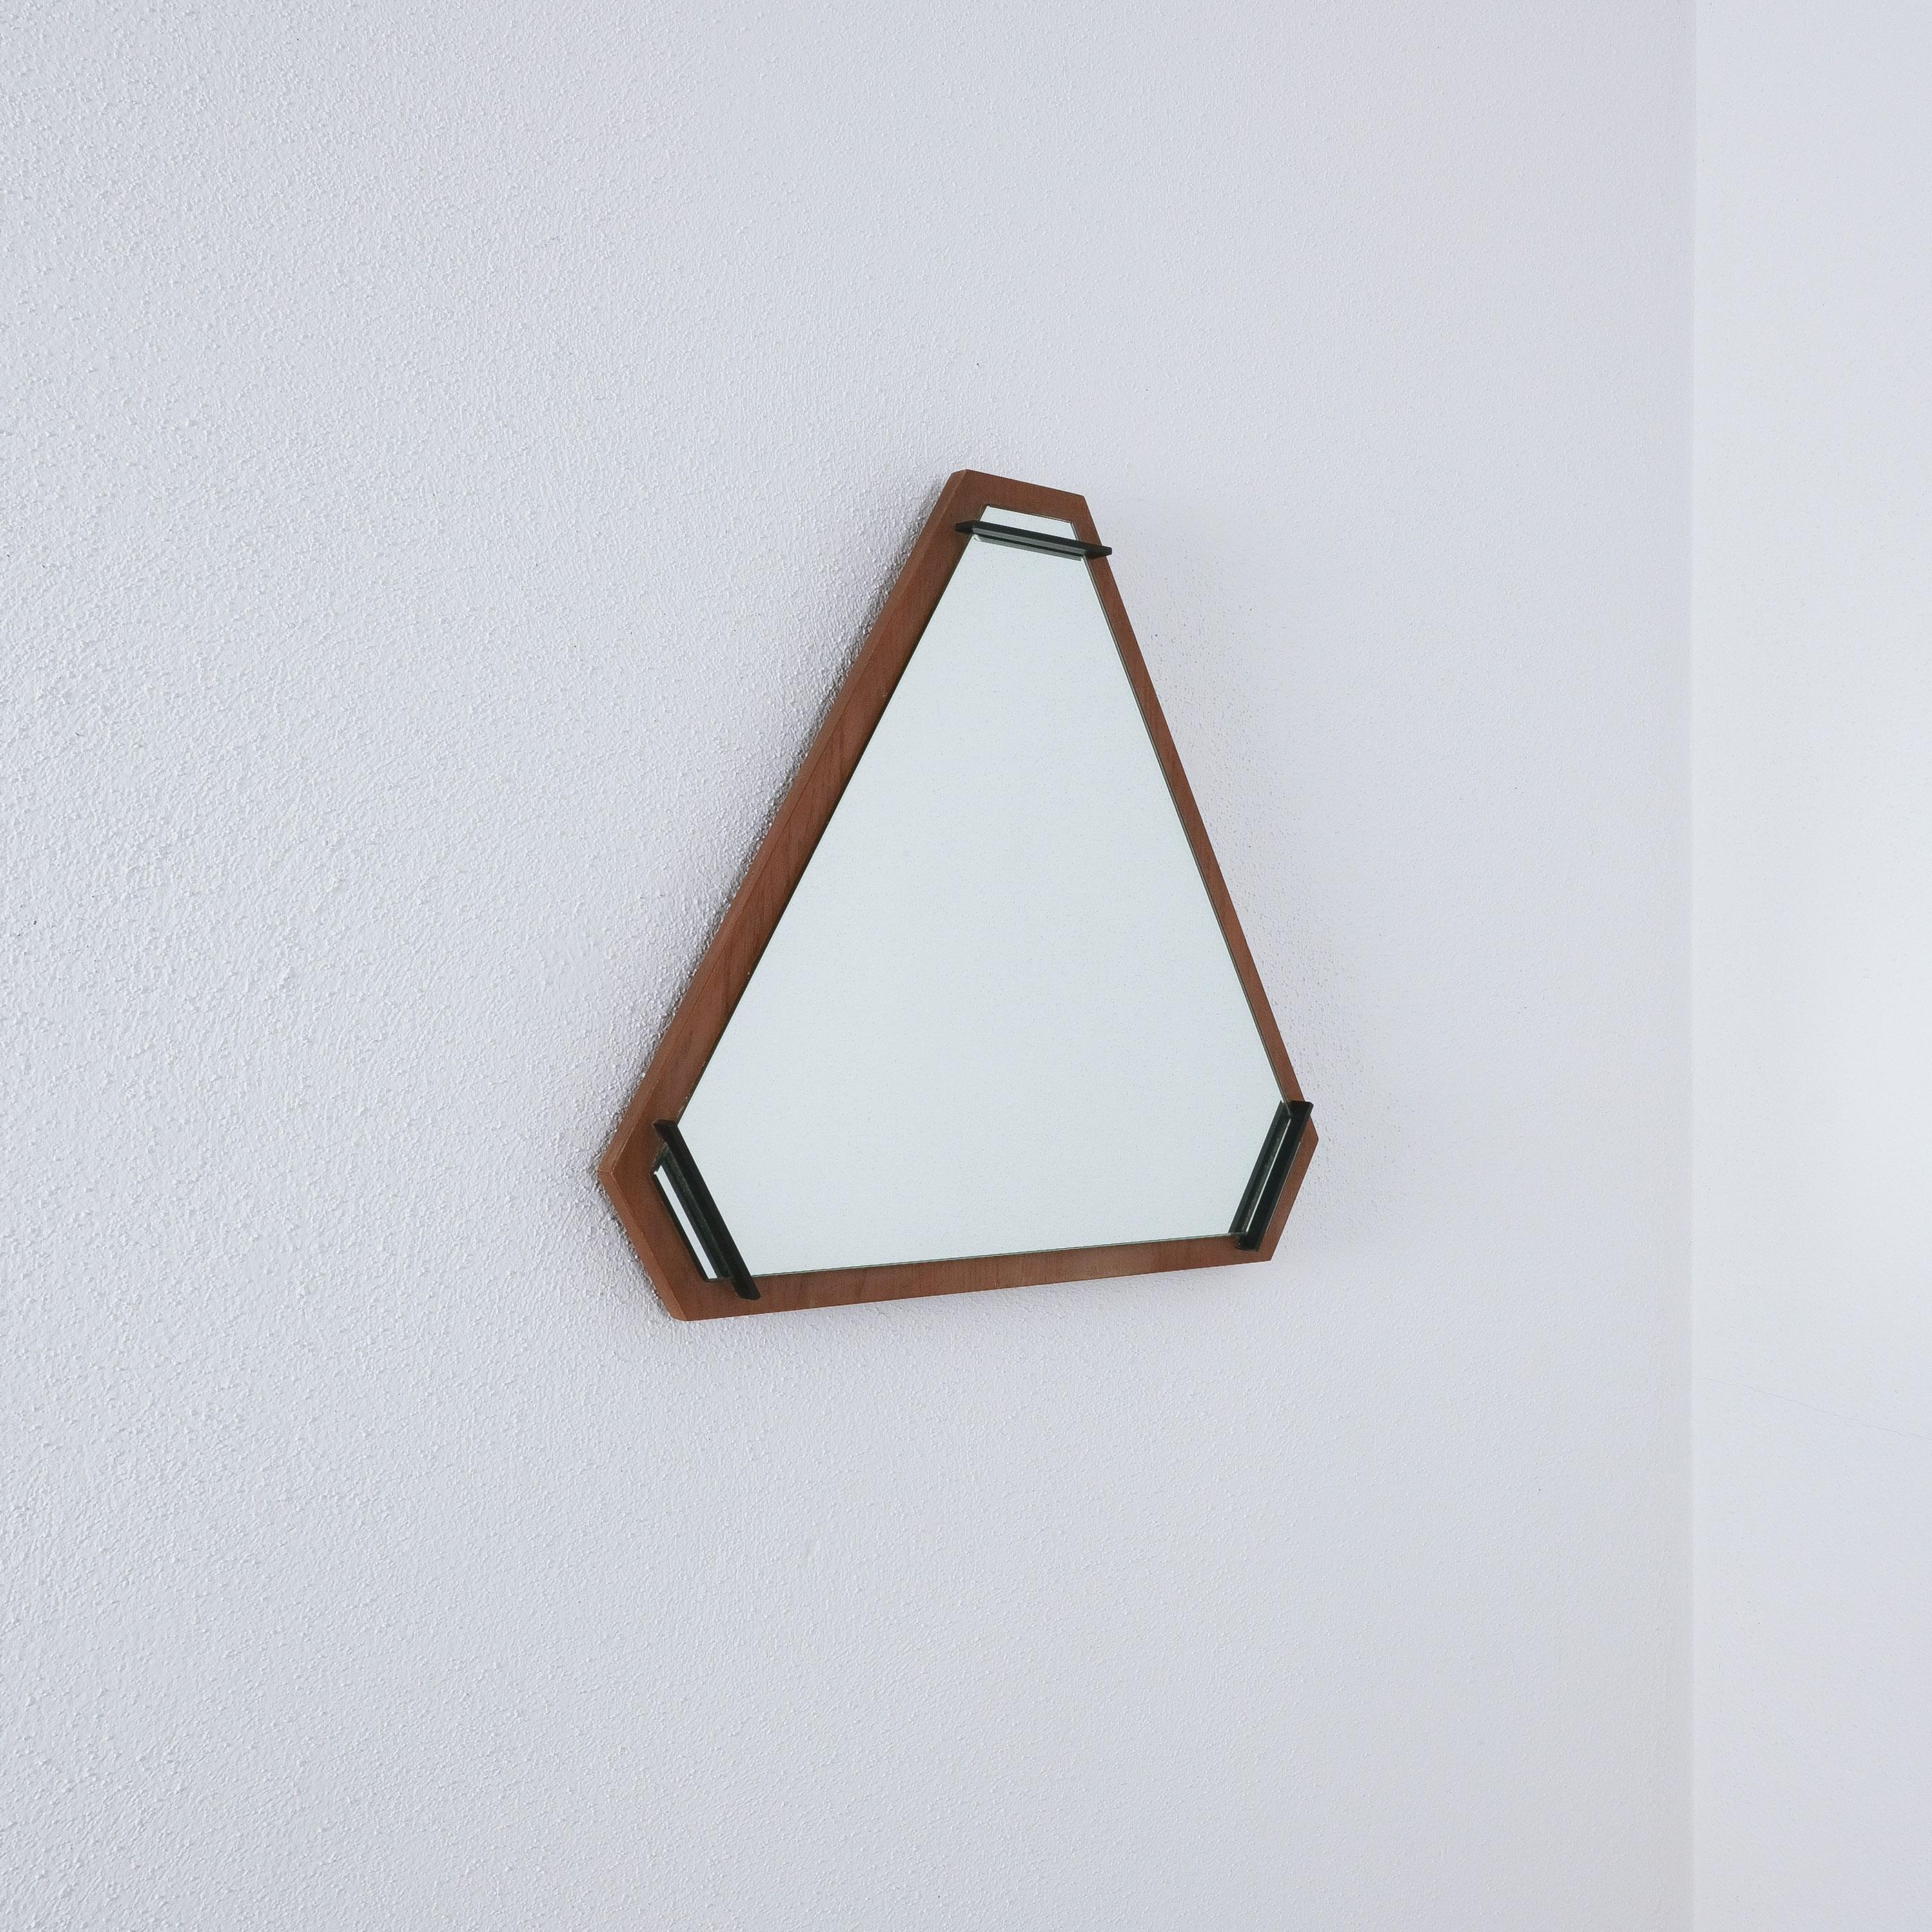 Mid-20th Century Pair of Walnut Wood Mirrors, Midcentury, Italy For Sale